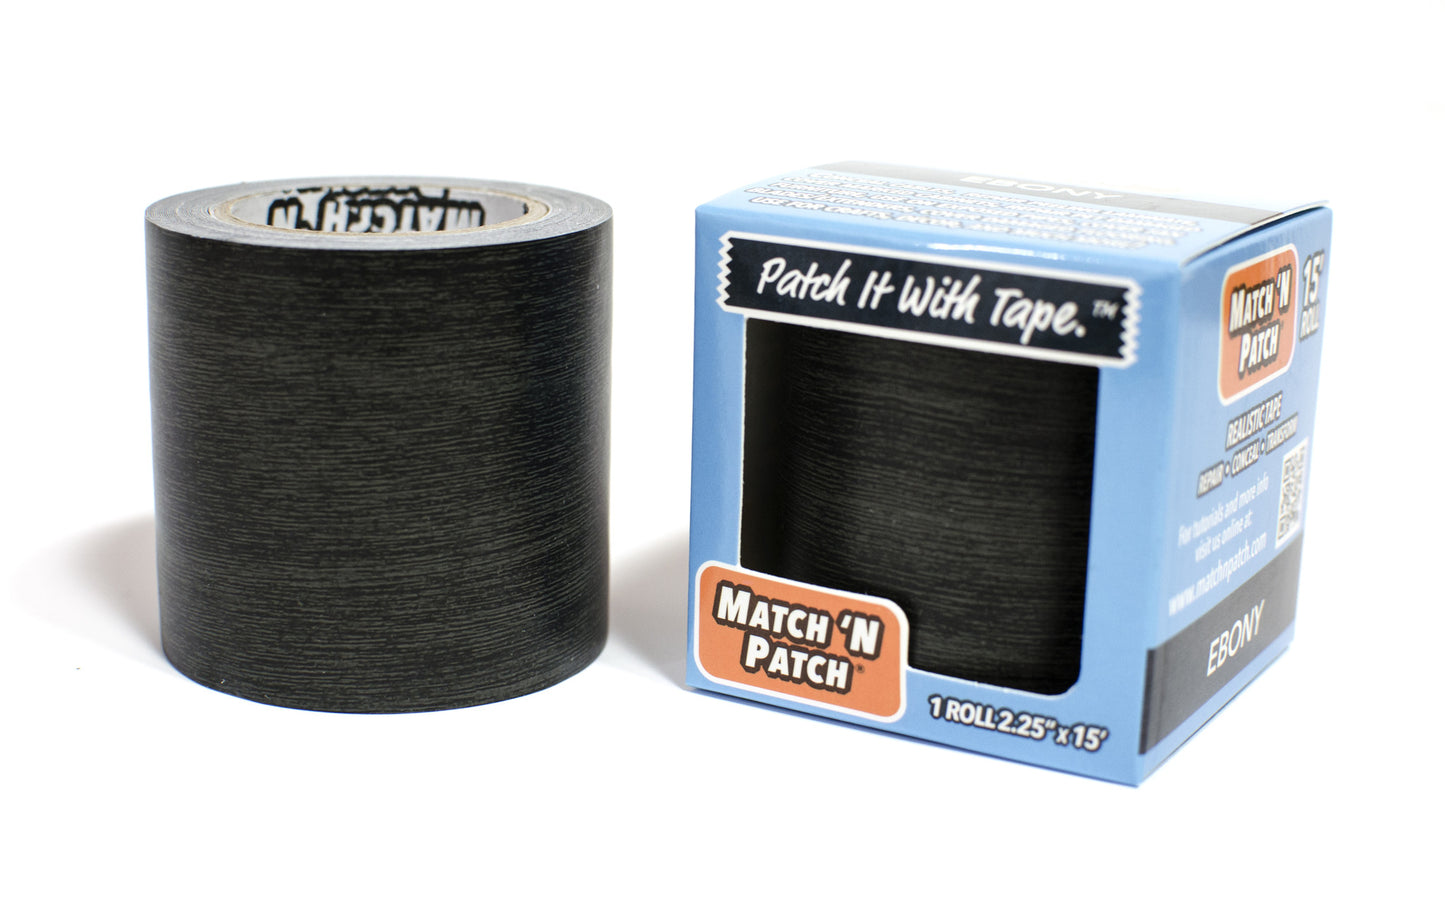  MATCH 'N PATCH Realistic Leather Repair Tape, Black, 2.25 inch  x 15 feet